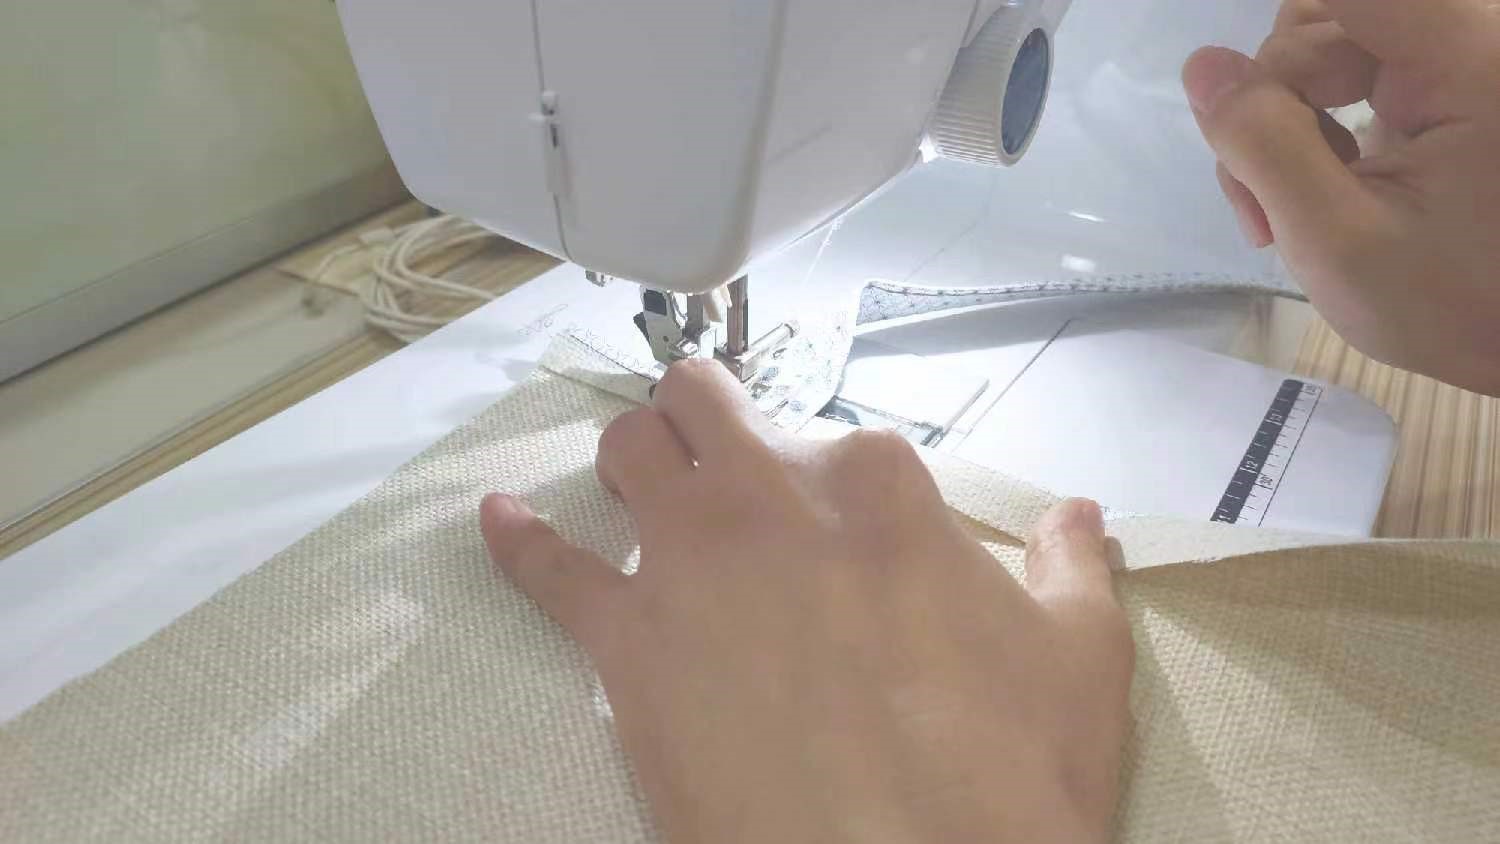 Use a sewing machine to make slices into bags